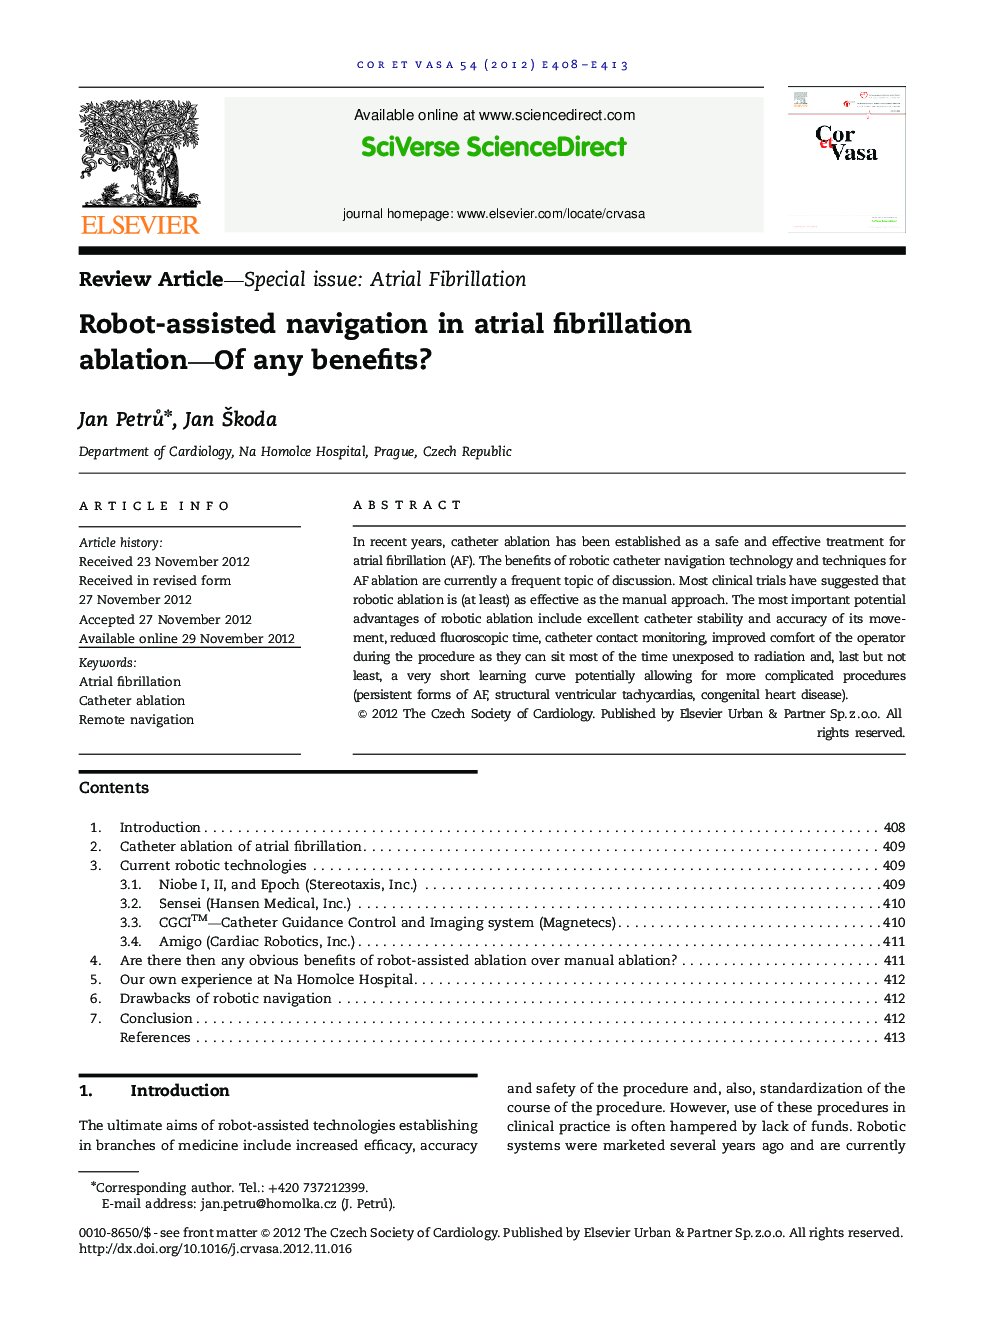 Review Article-Special issue: Atrial FibrillationRobot-assisted navigation in atrial fibrillation ablation-Of any benefits?